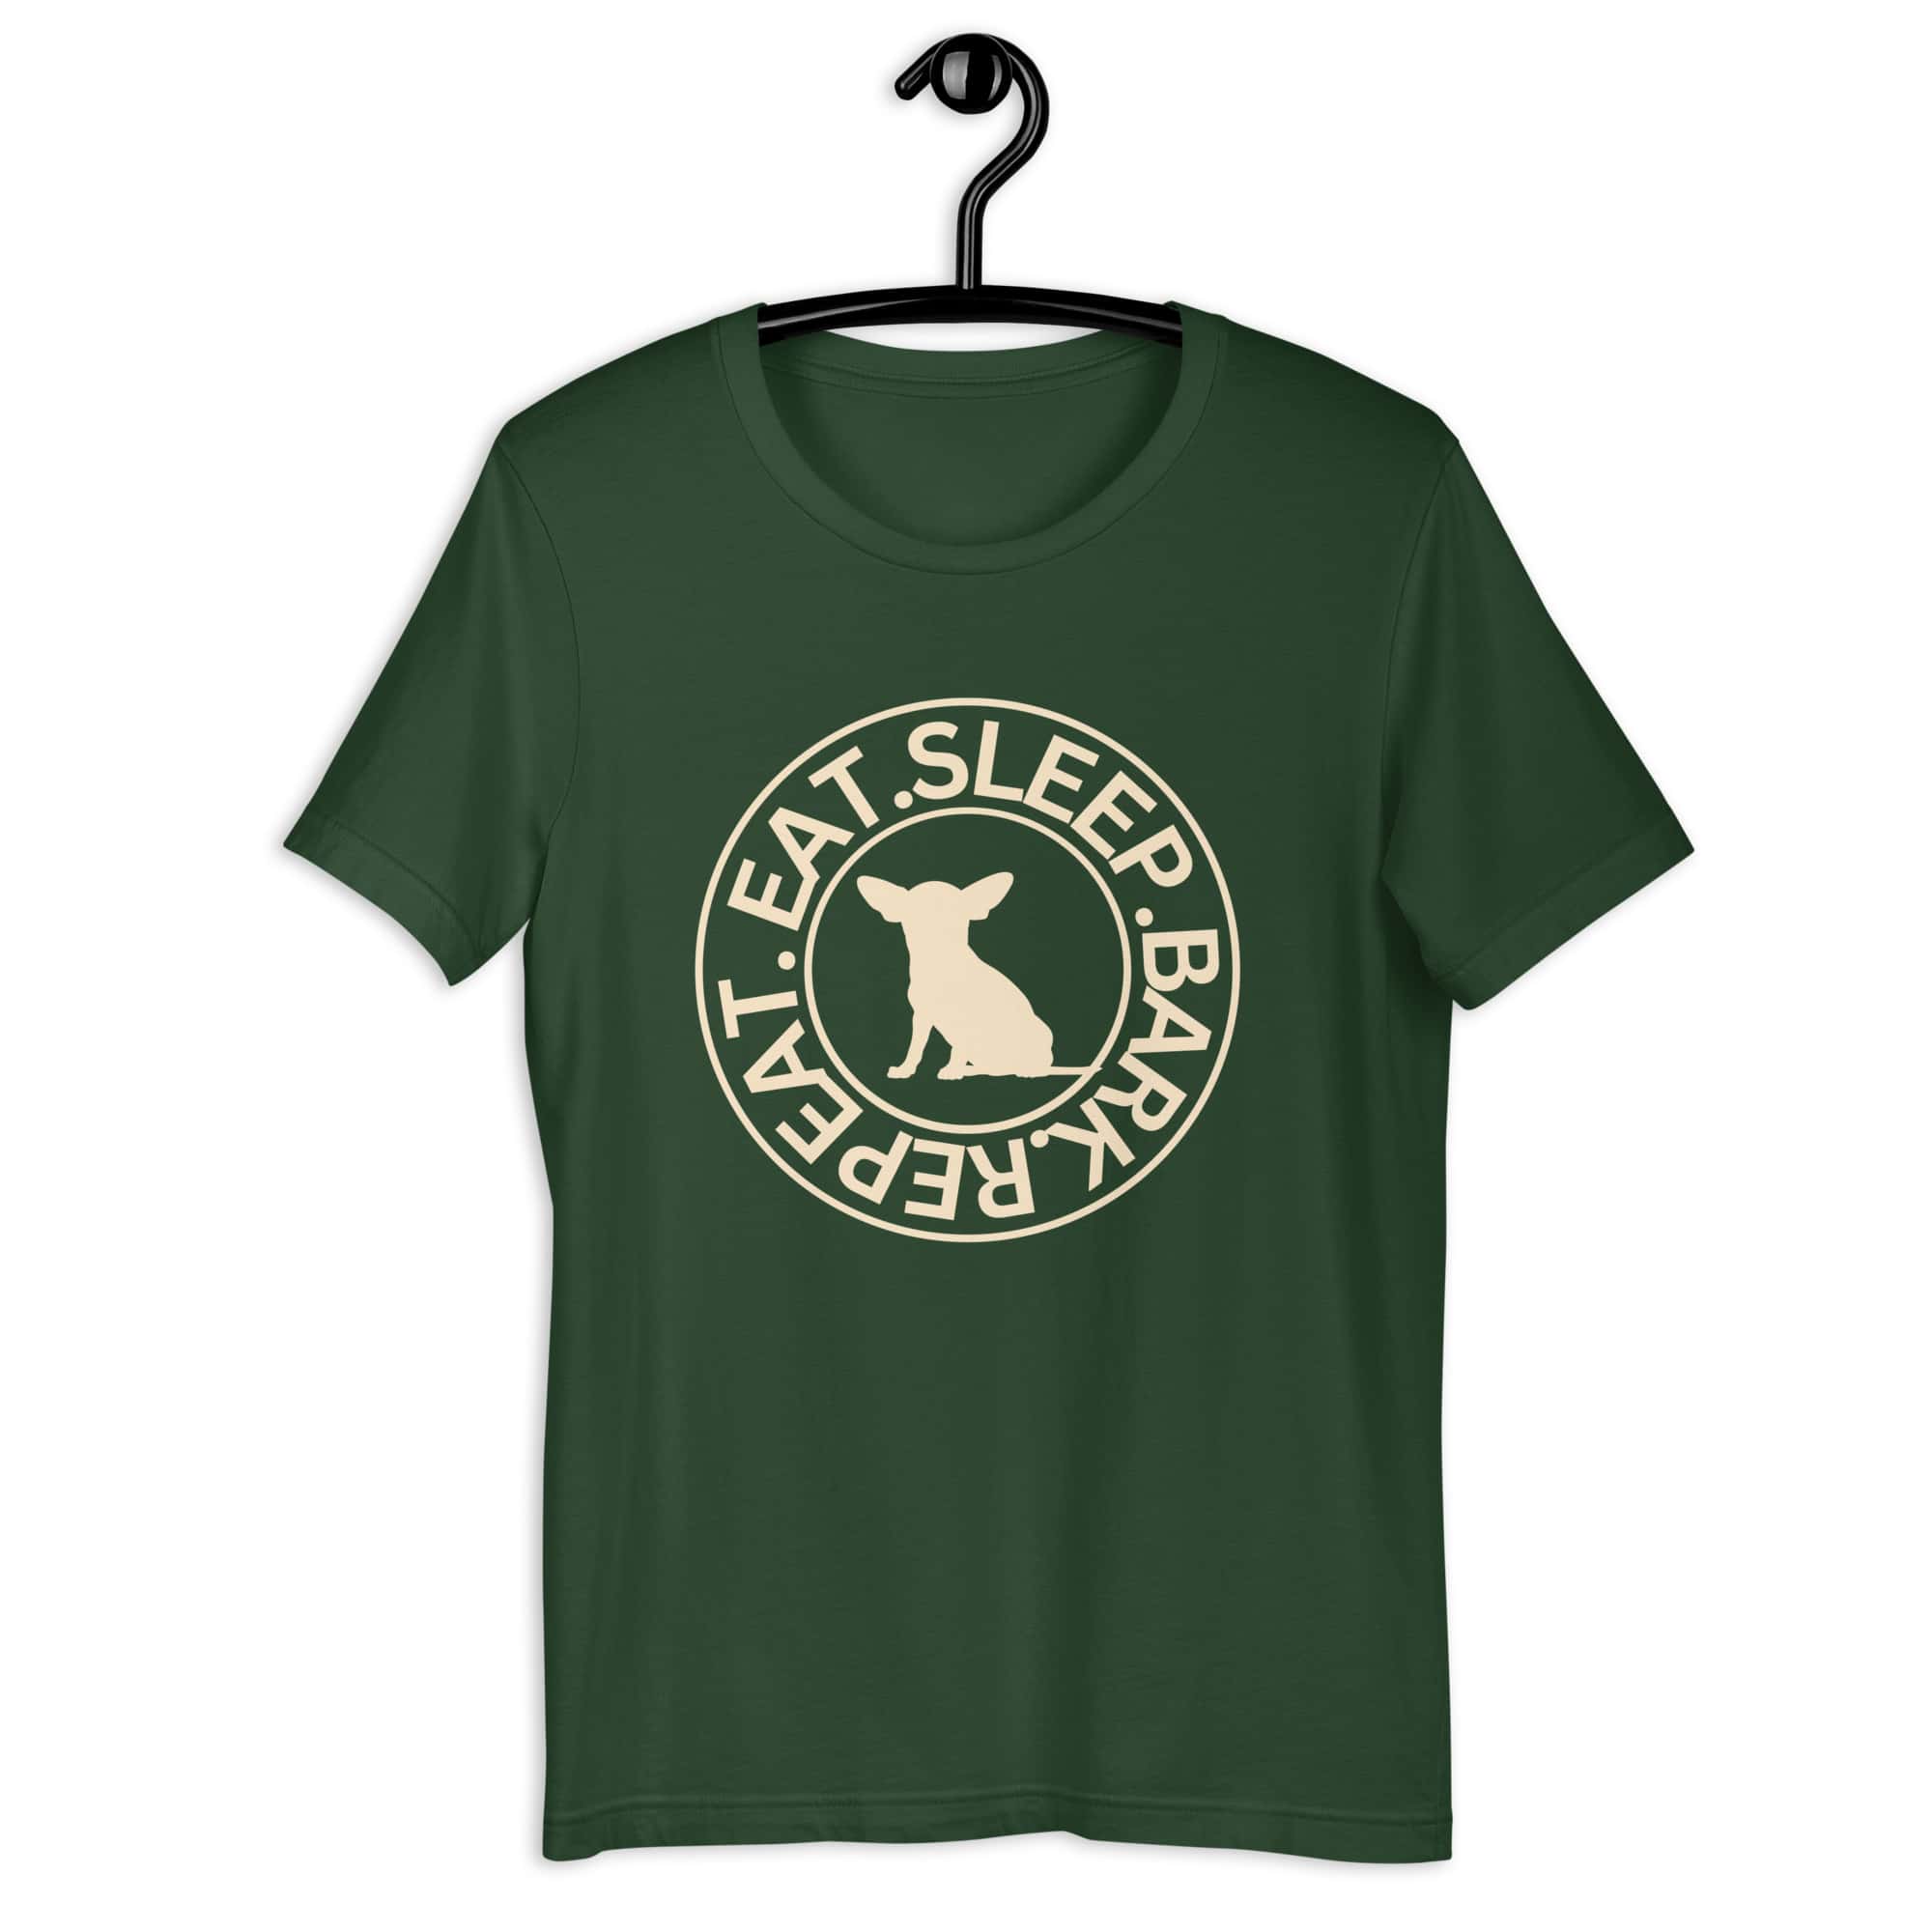 Eat Sleep Bark Repeat Chihuahua Unisex T-Shirt. Forest Green